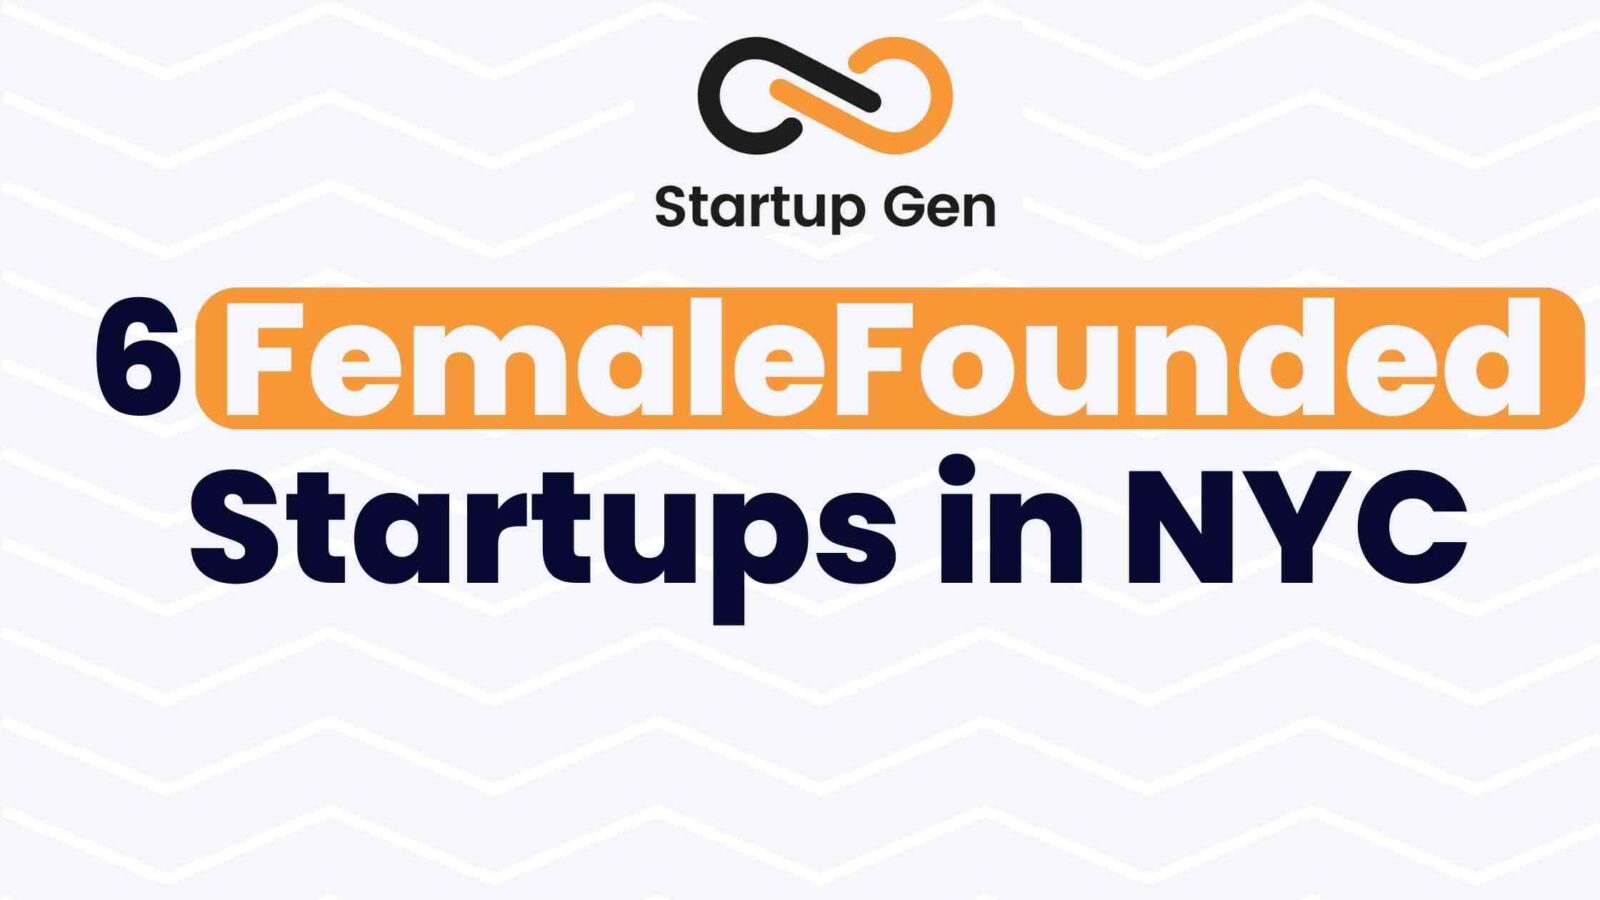 Female Founded Startups